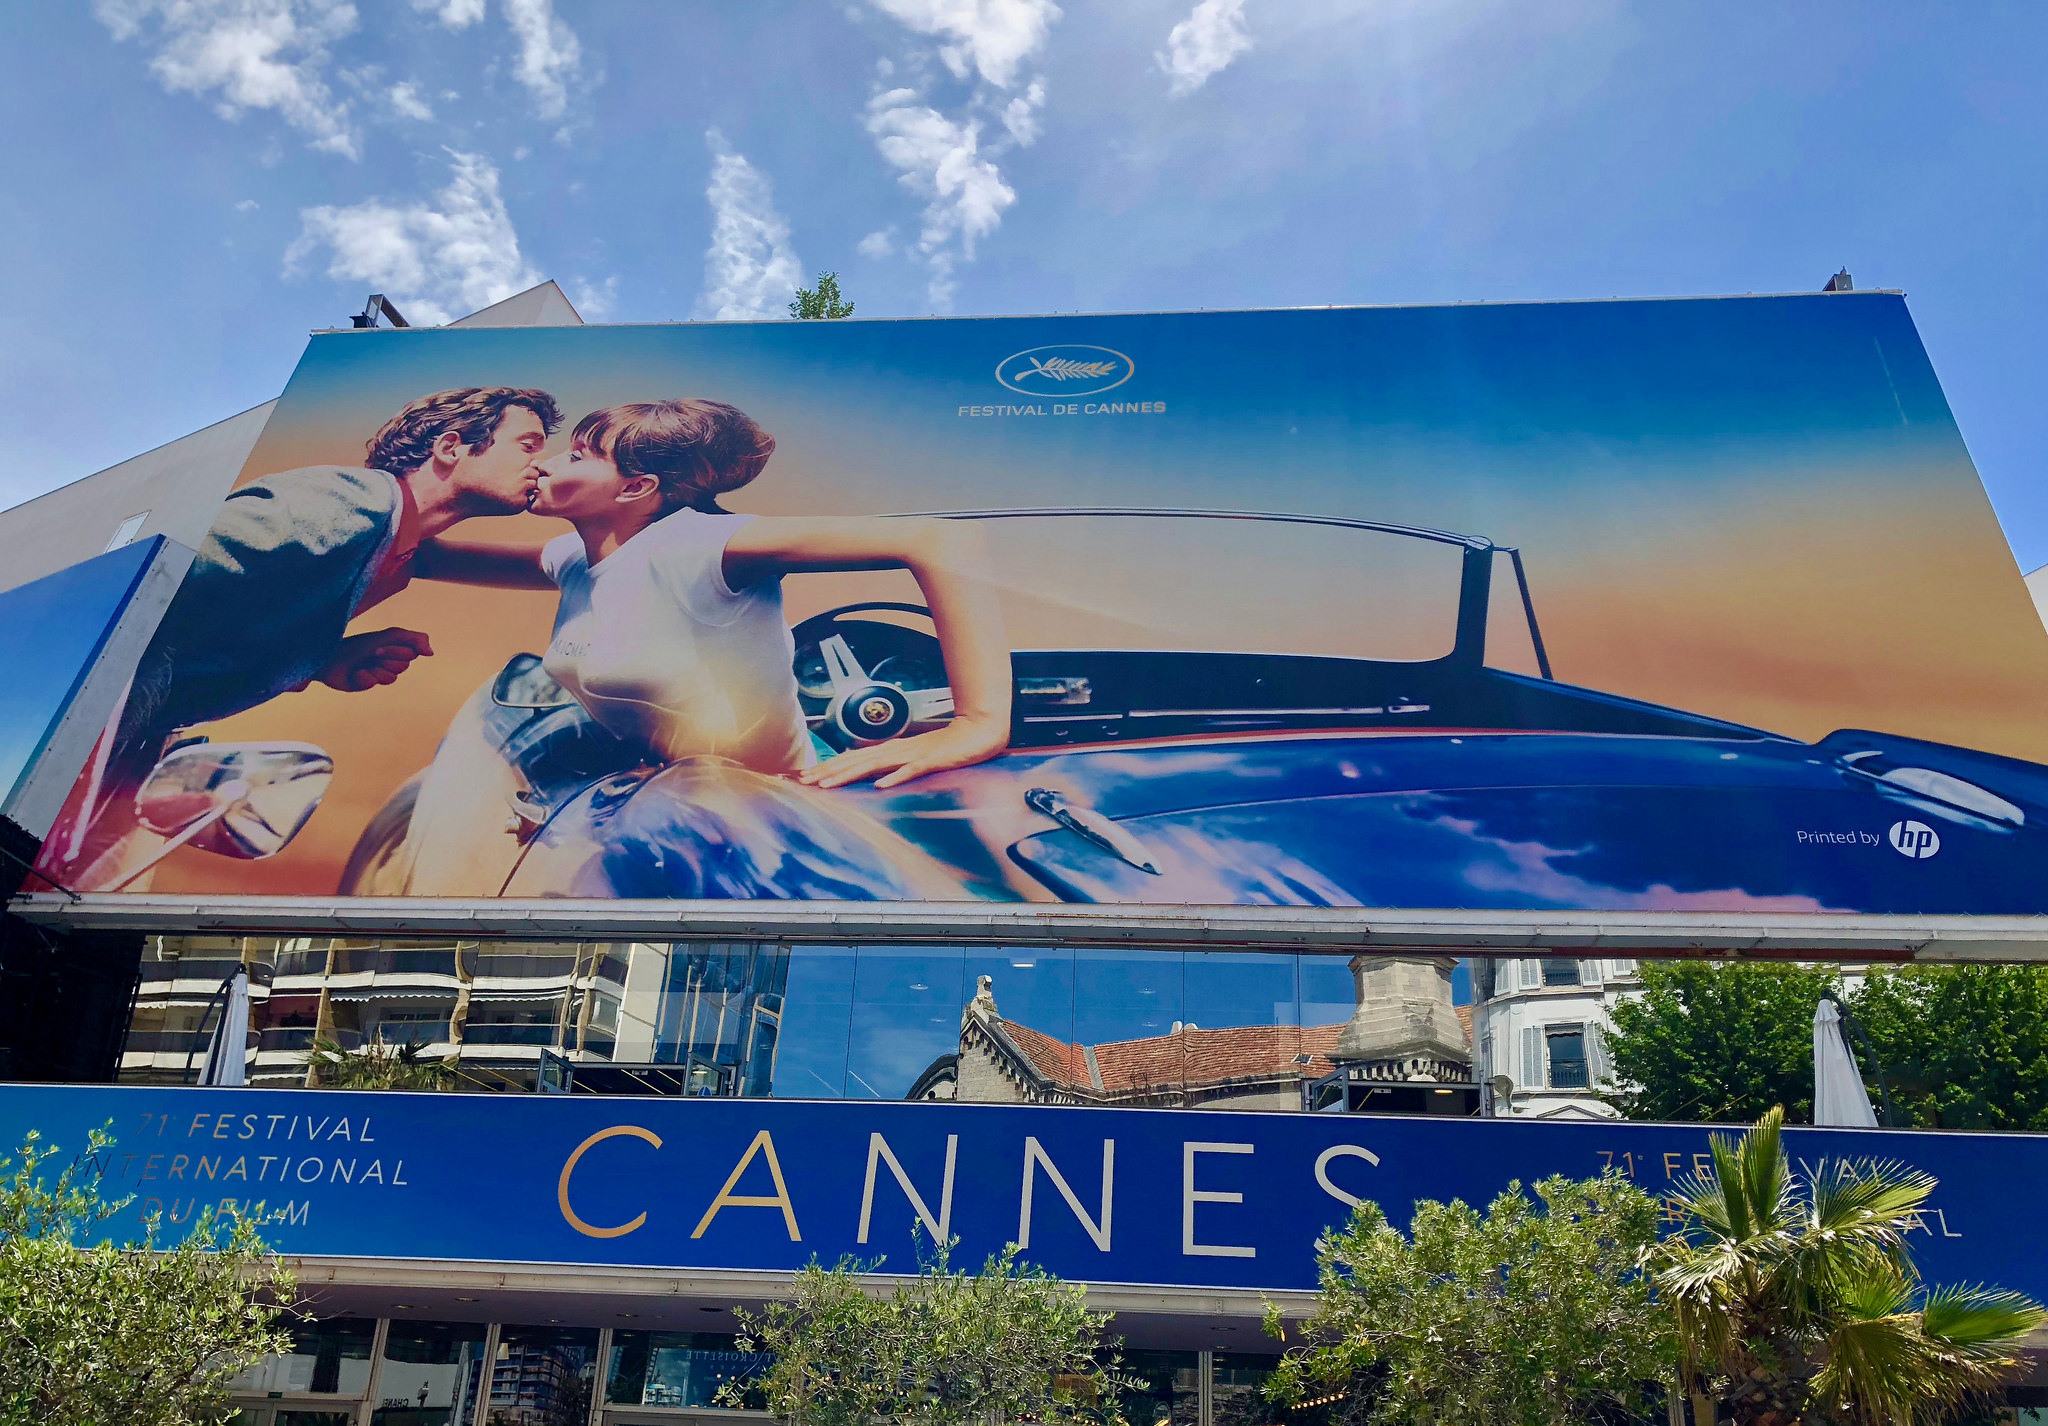 Cannes Film Festival won't take place 'in its original form' this year